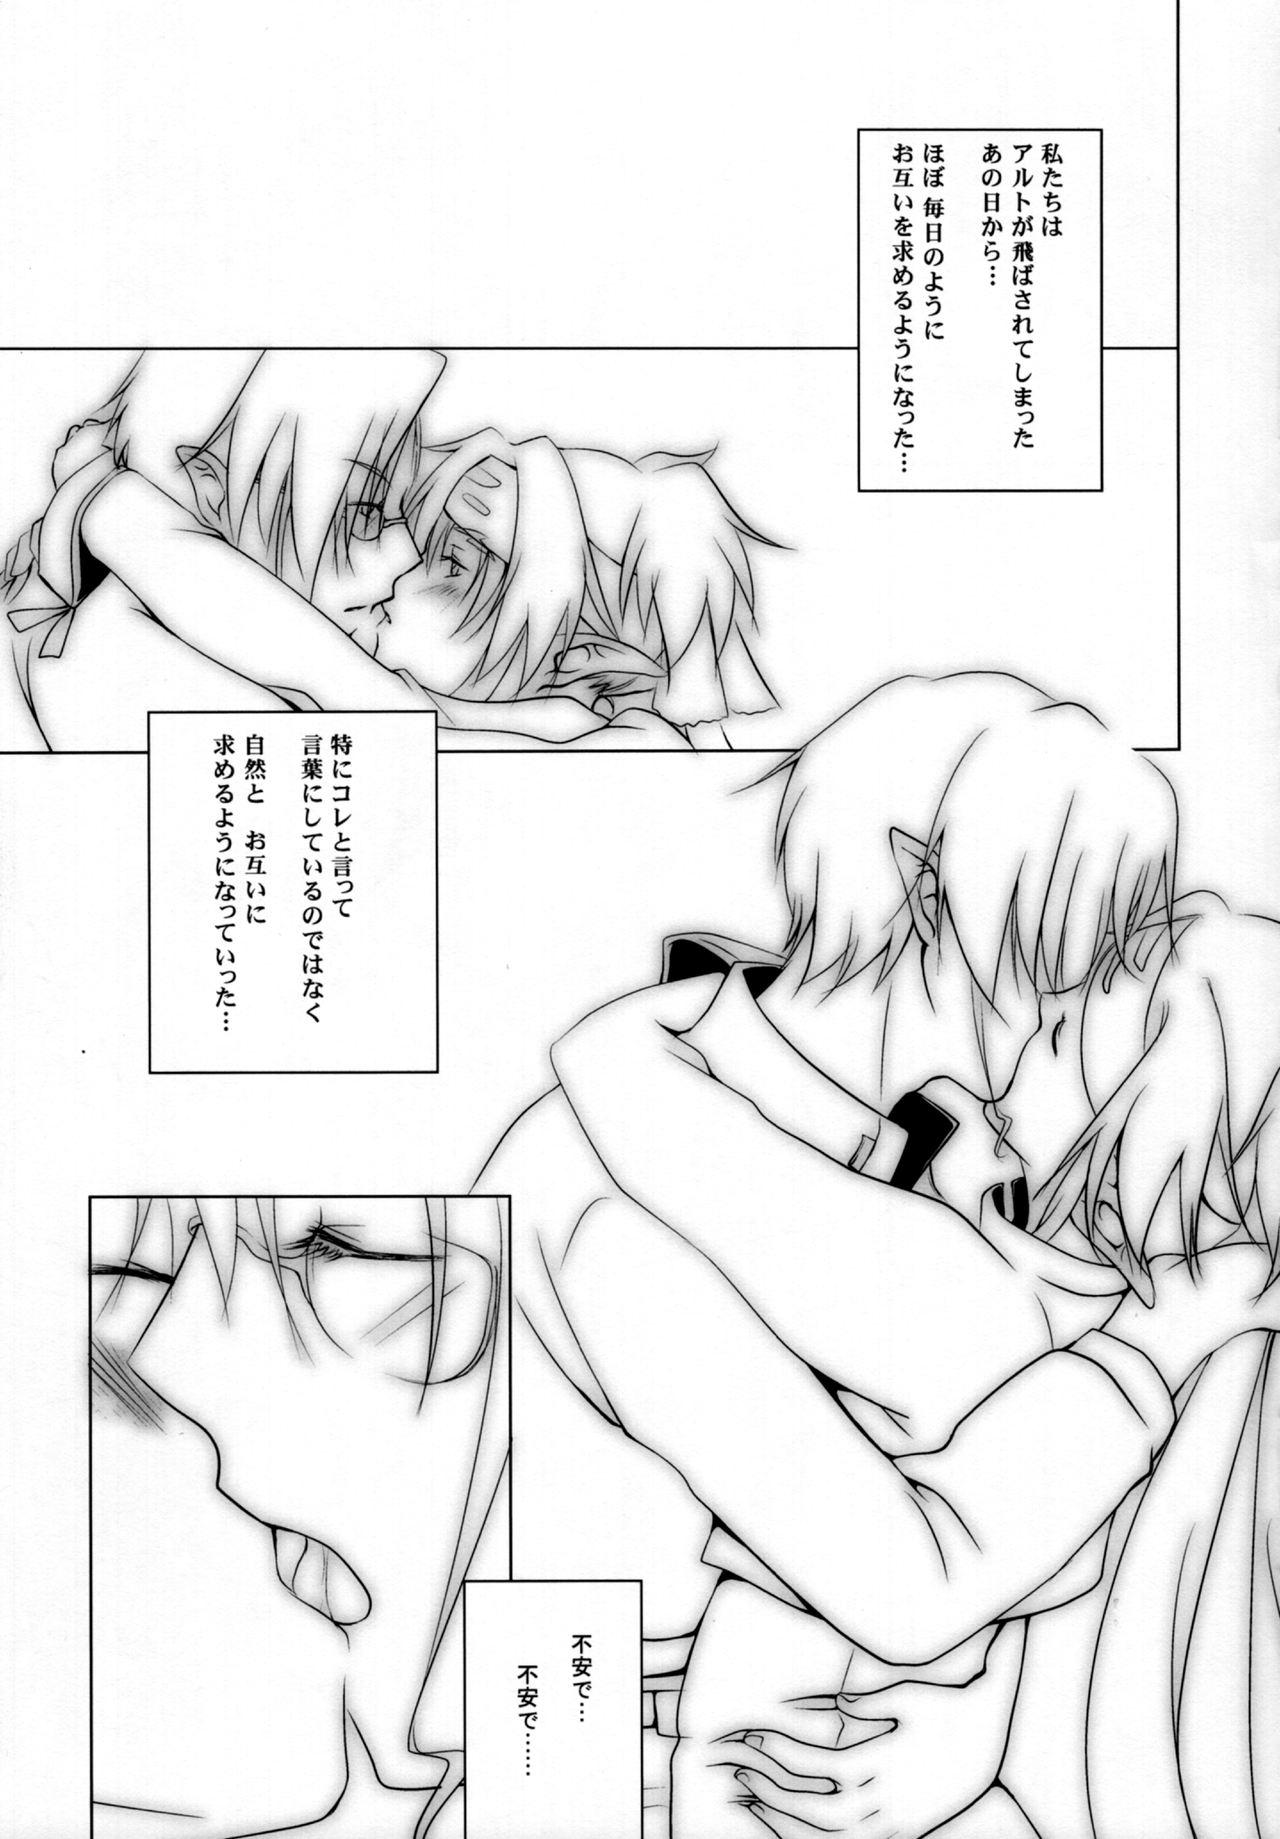 Gay Pissing Ever moment with you - Macross frontier Massive - Page 2